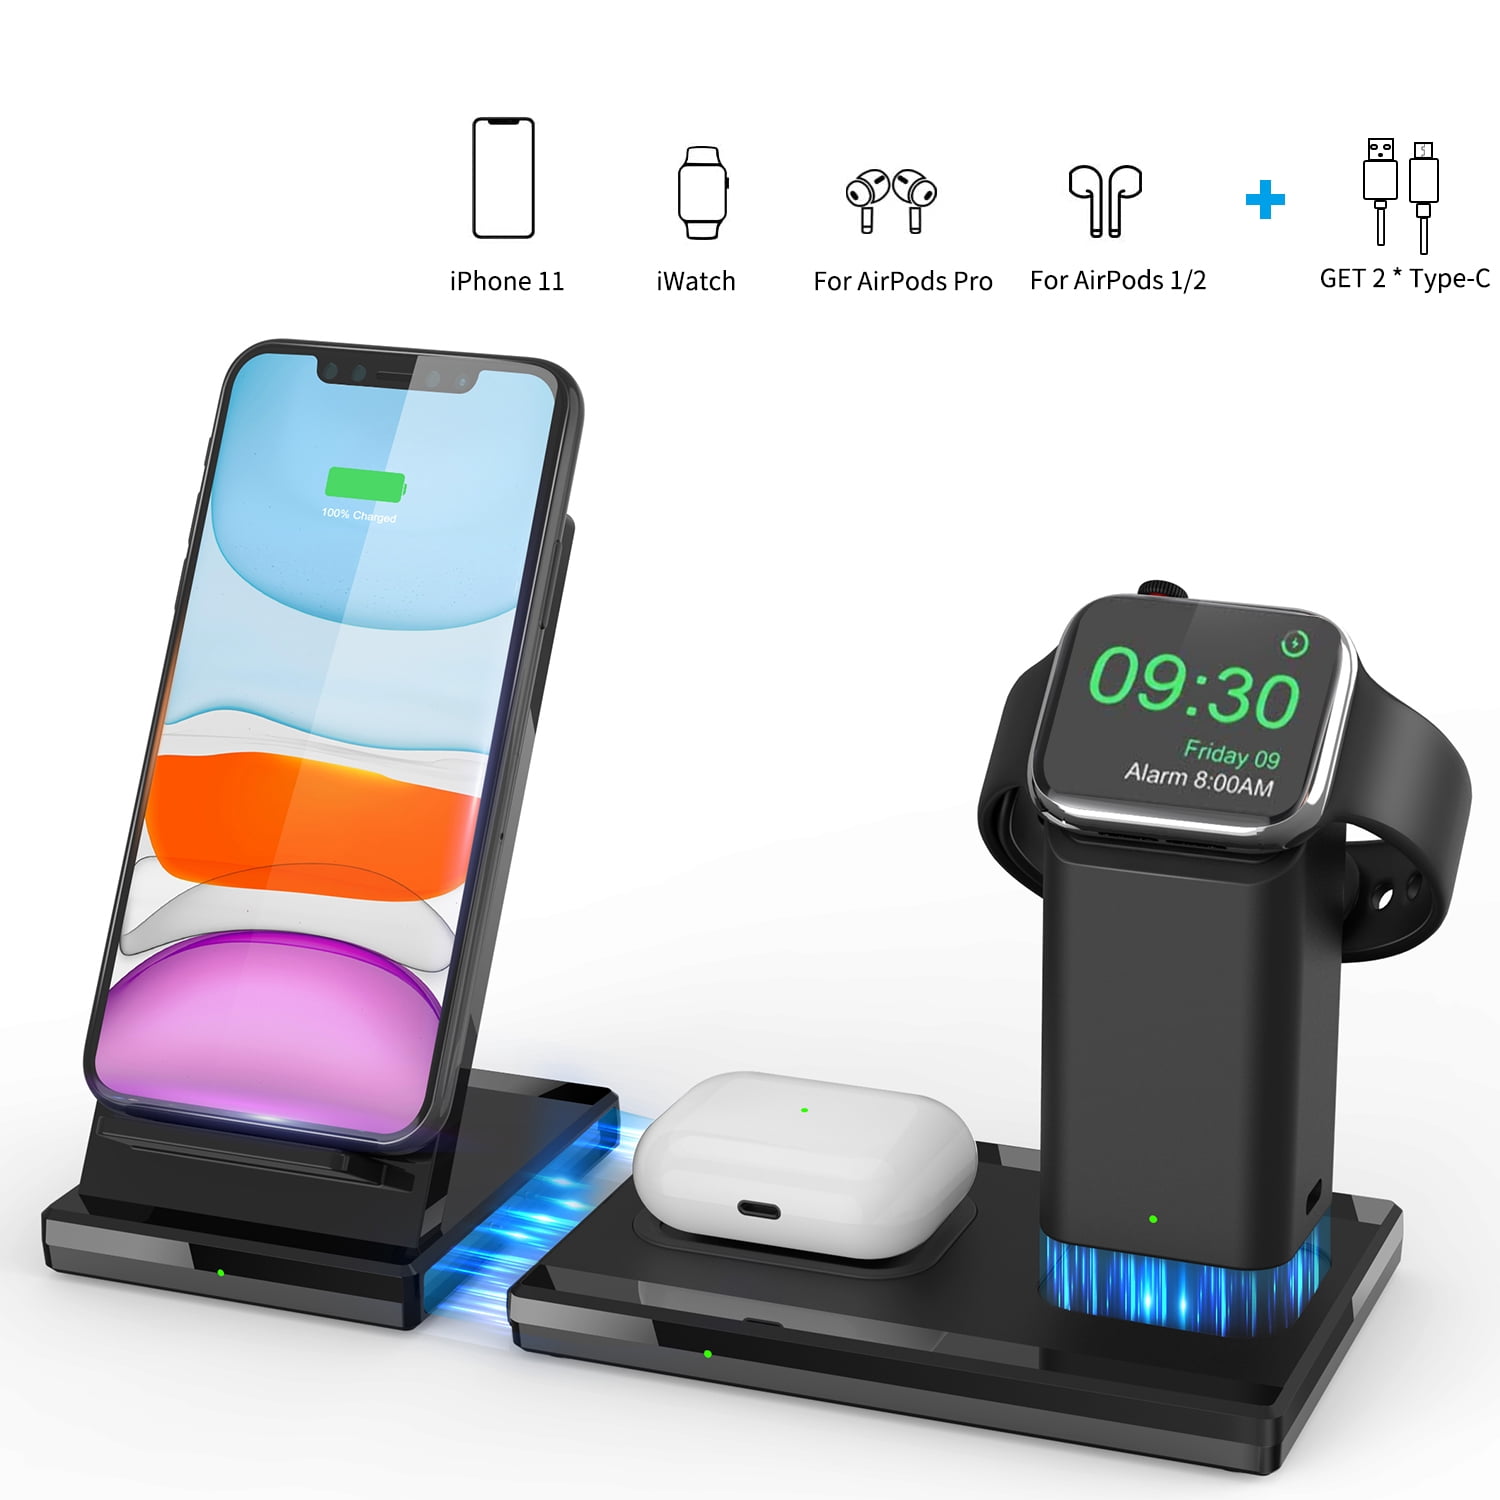 3 IN 1 USB Charging Station for Multiple Devices, Fast Charging Dock